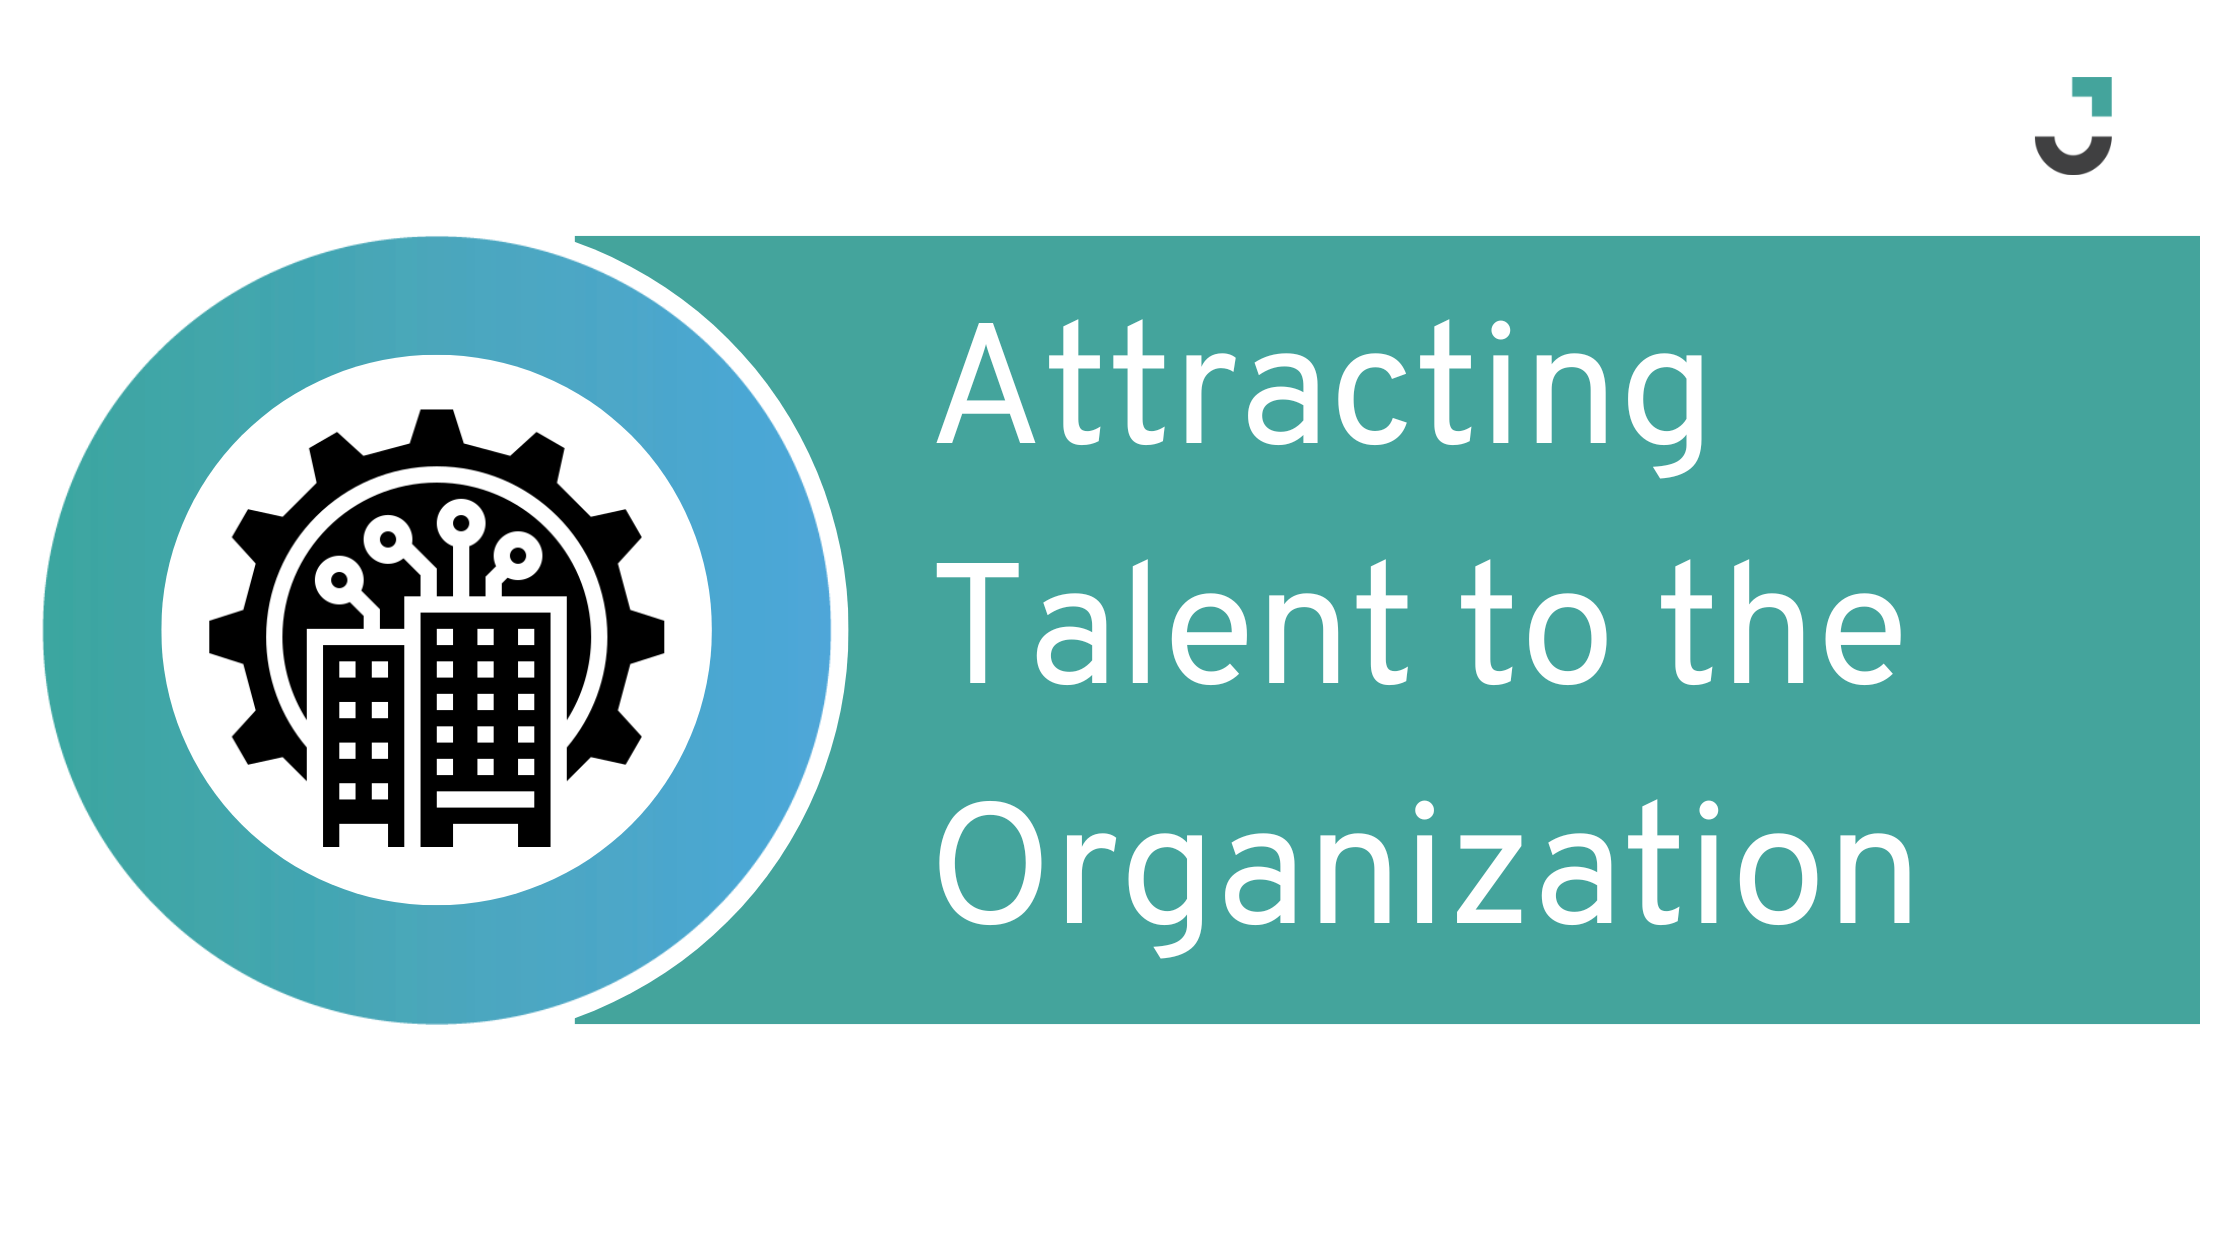 Attracting Talent to the Organization